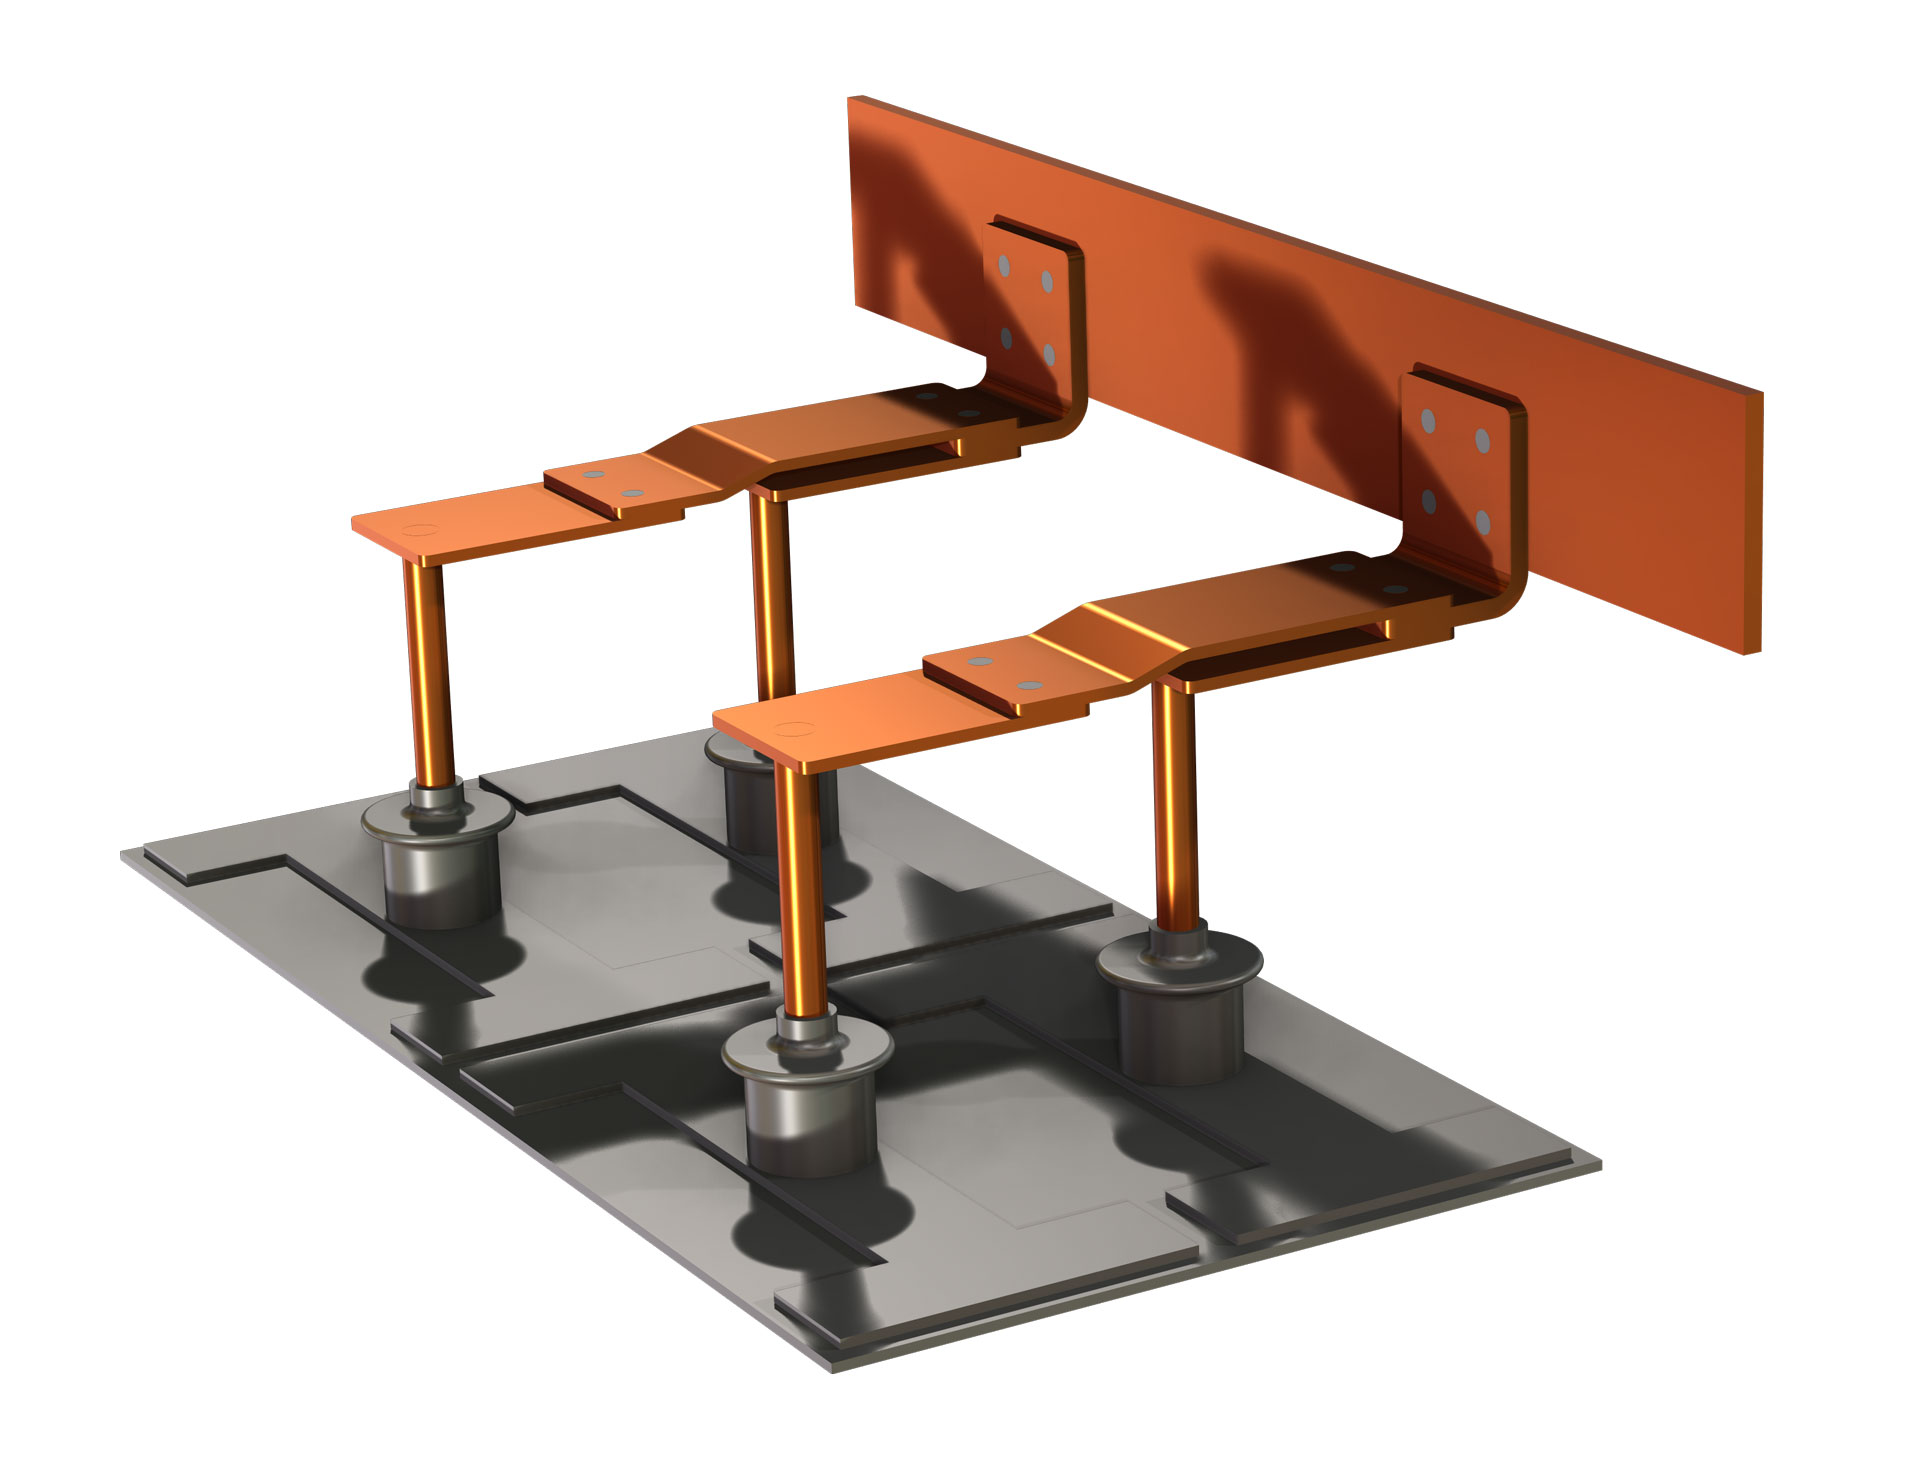 A busbar assembly model showing the material appearance and shadows.